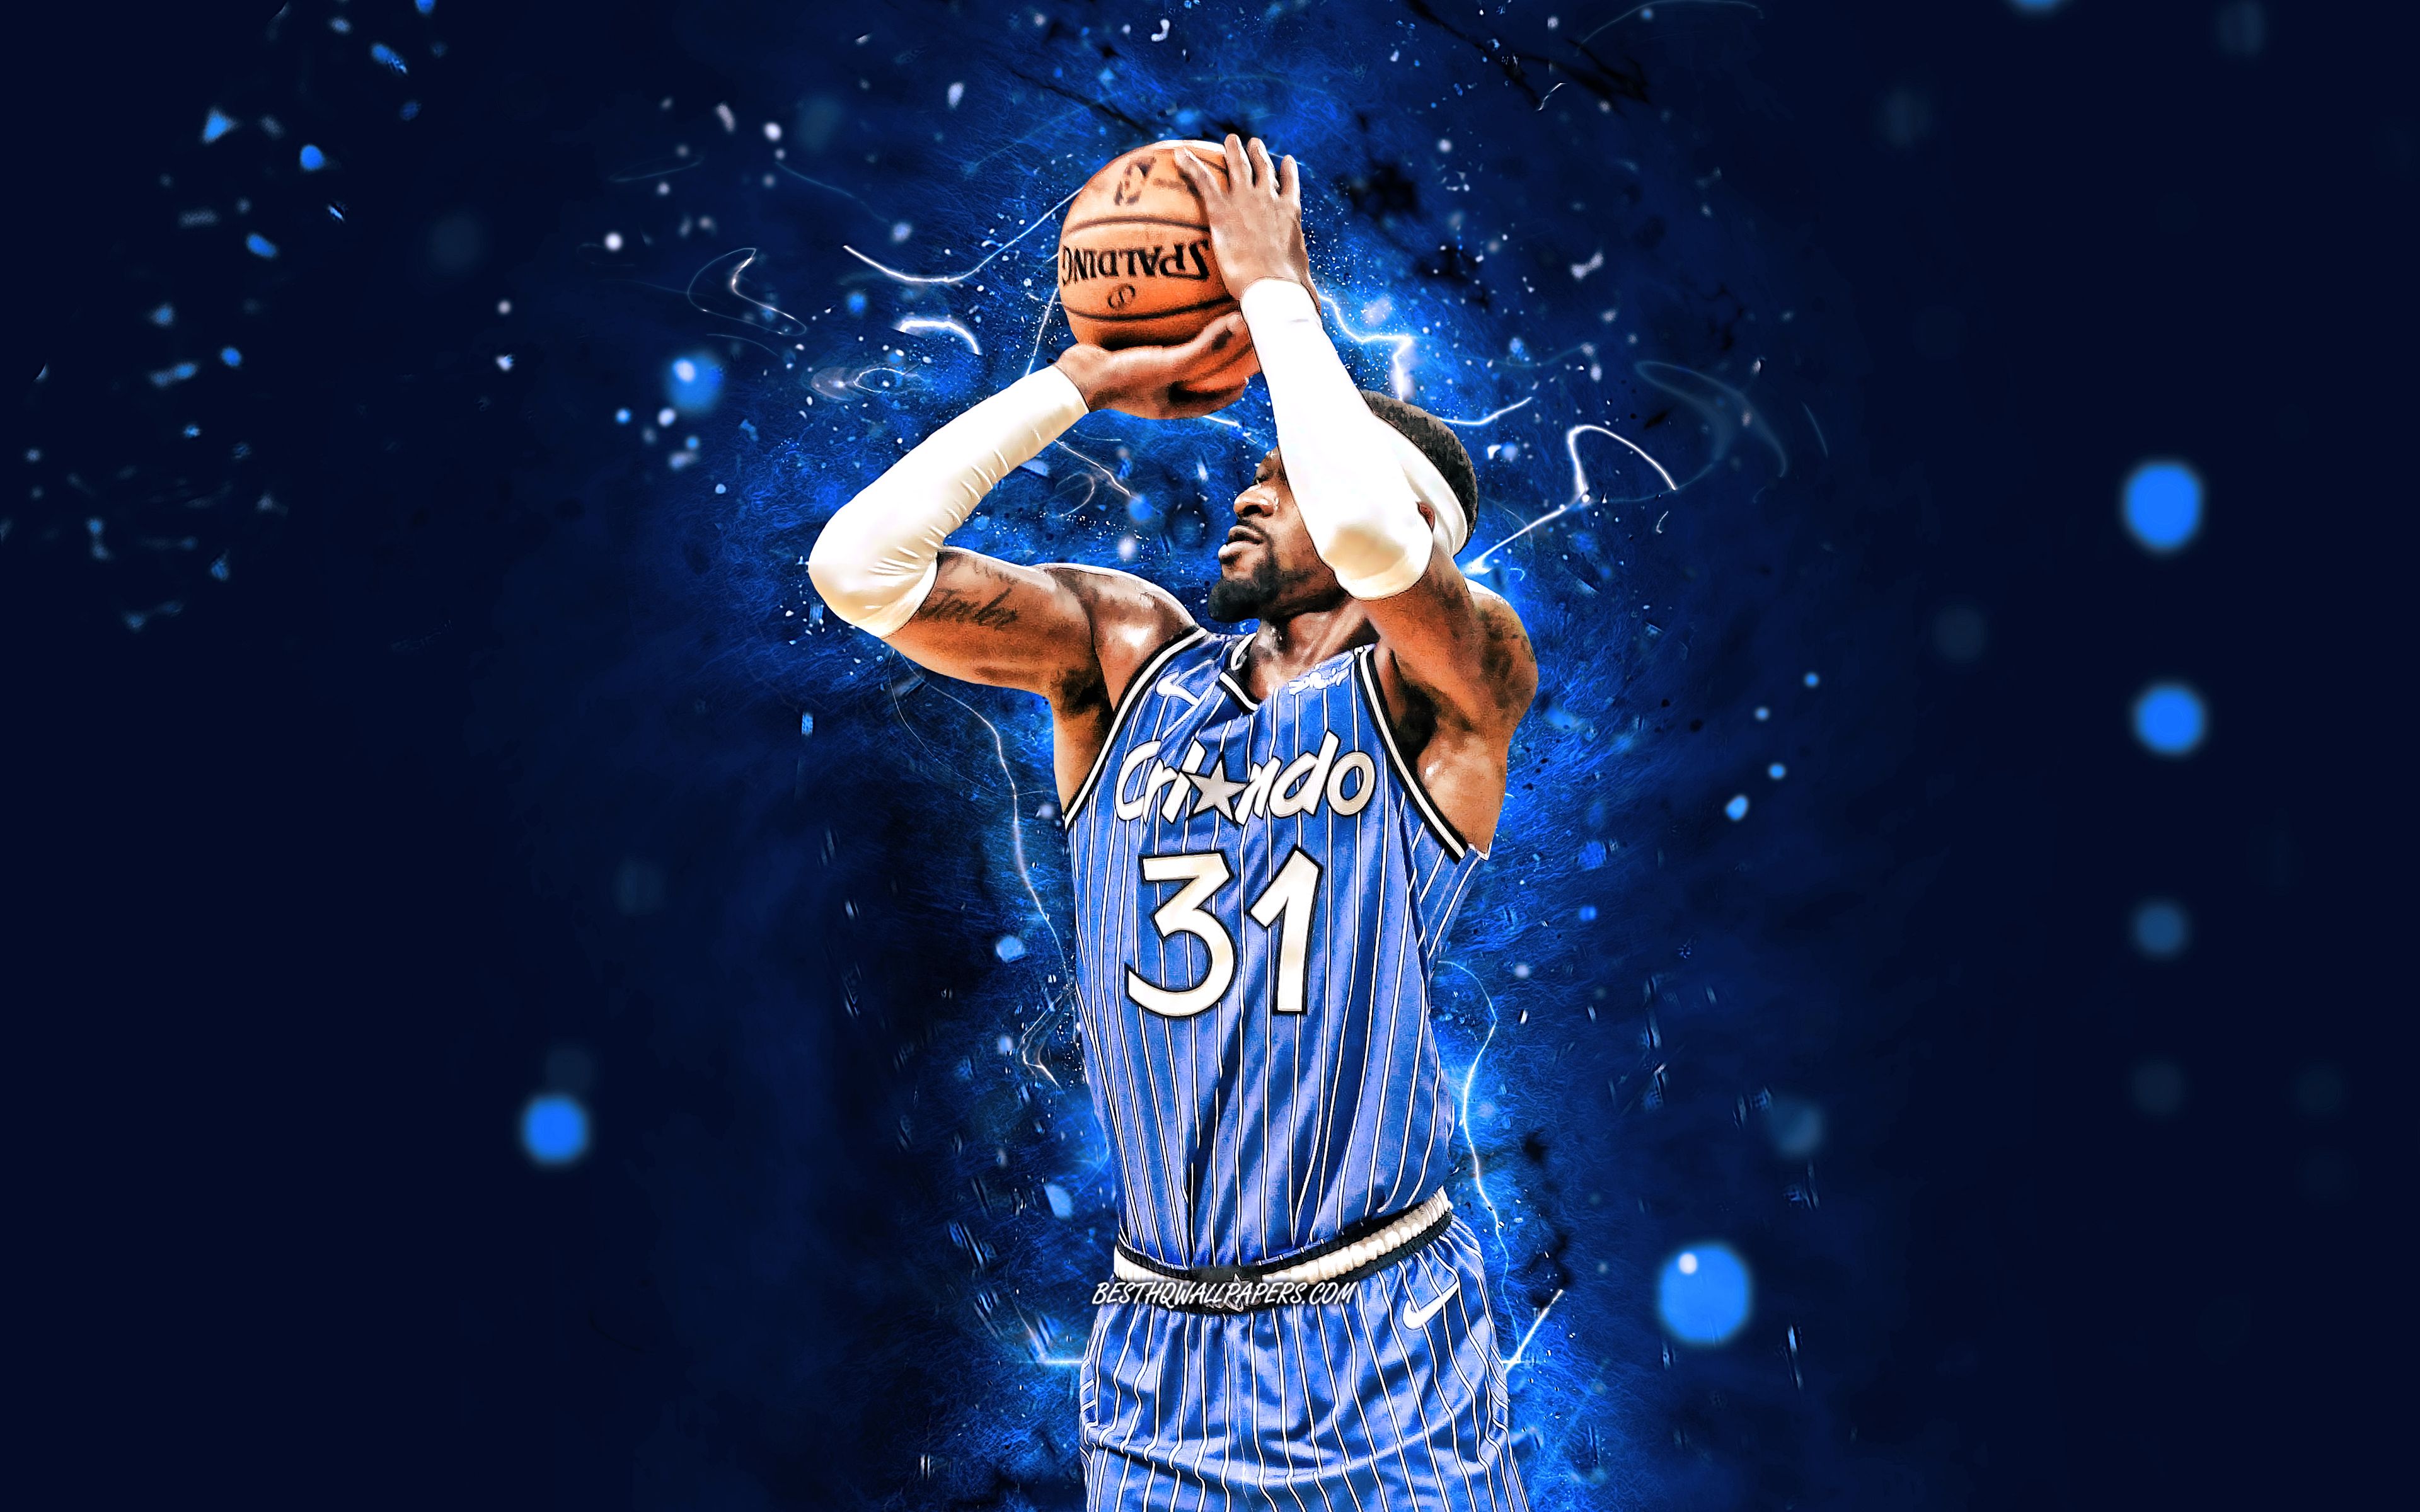 Download wallpaper Terrence Ross, 4k, Orlando Magic, NBA, basketball, USA, Terrence Ross Orlando Magic, blue neon lights, Terrence Ross 4K for desktop with resolution 3840x2400. High Quality HD picture wallpaper